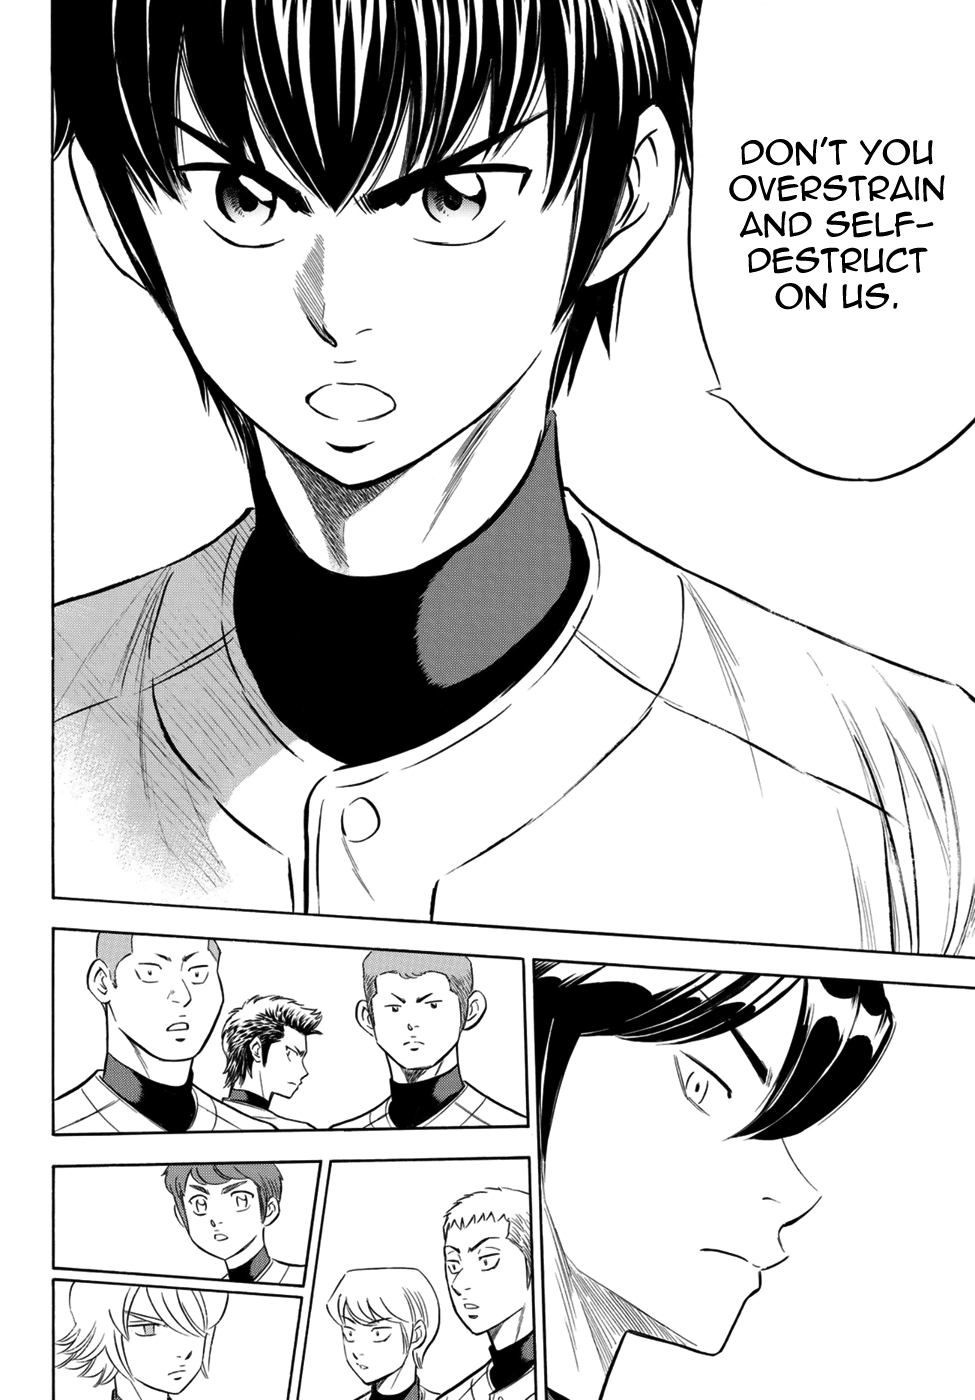 Diamond no Ace Act II Ch. 105 Because He's Awesome